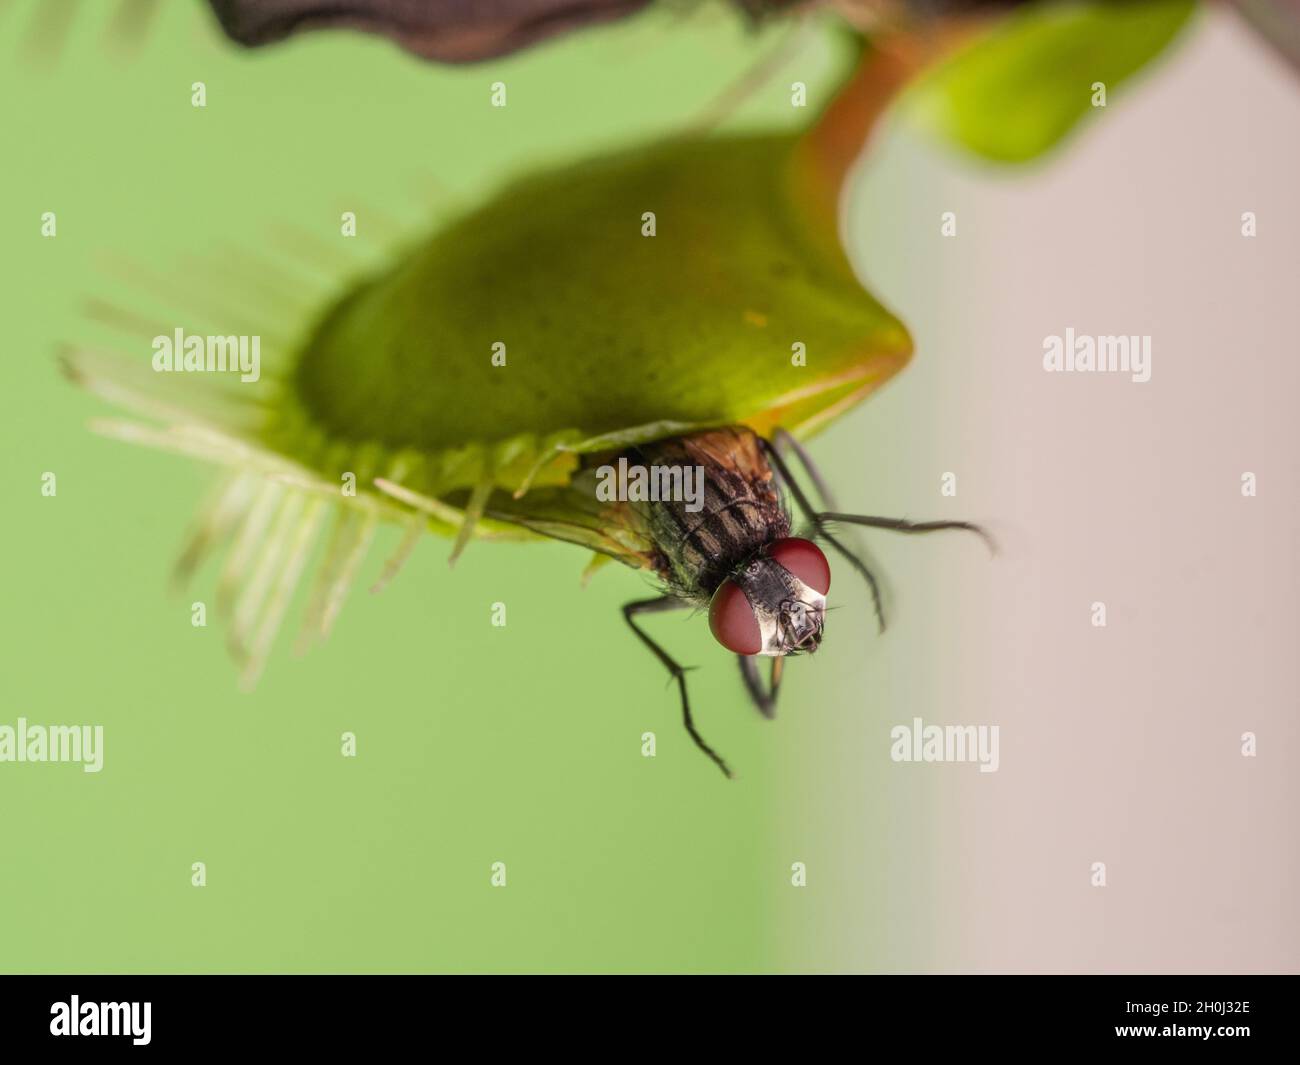 Venus flytrap with a fly on green background Stock Photo